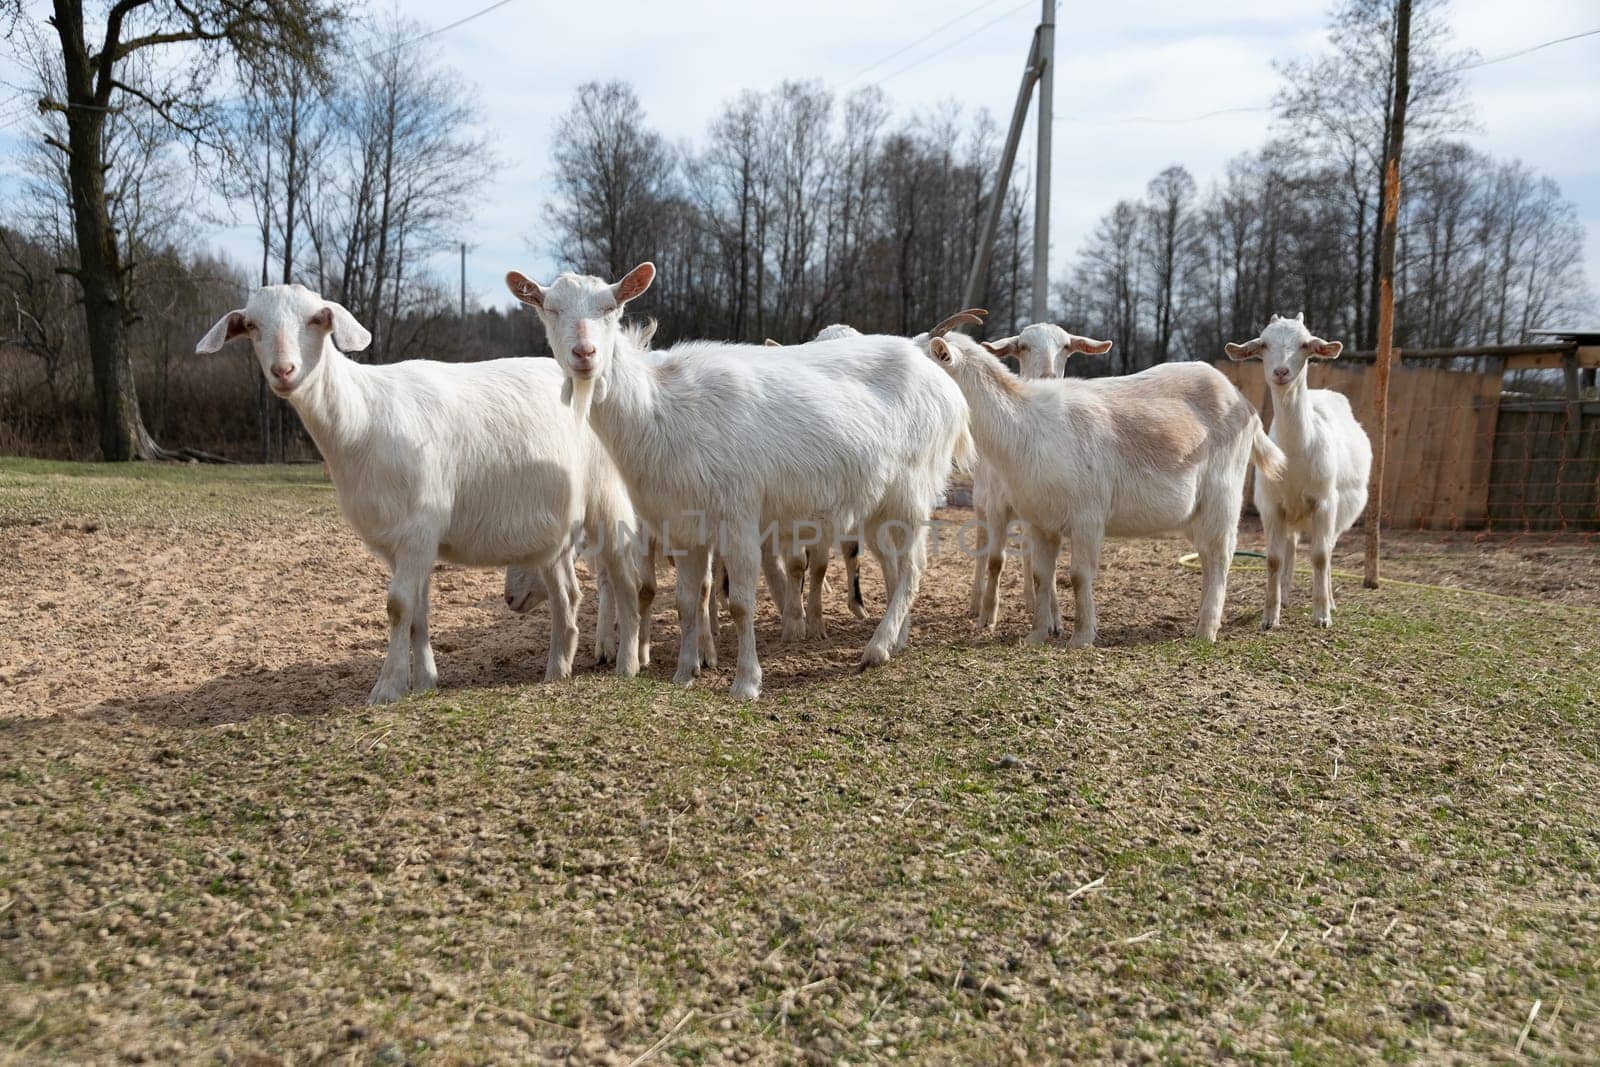 A group of goats of various colors and sizes standing closely together in a grassy field. The goats are all looking in different directions, while some are grazing on the grass.